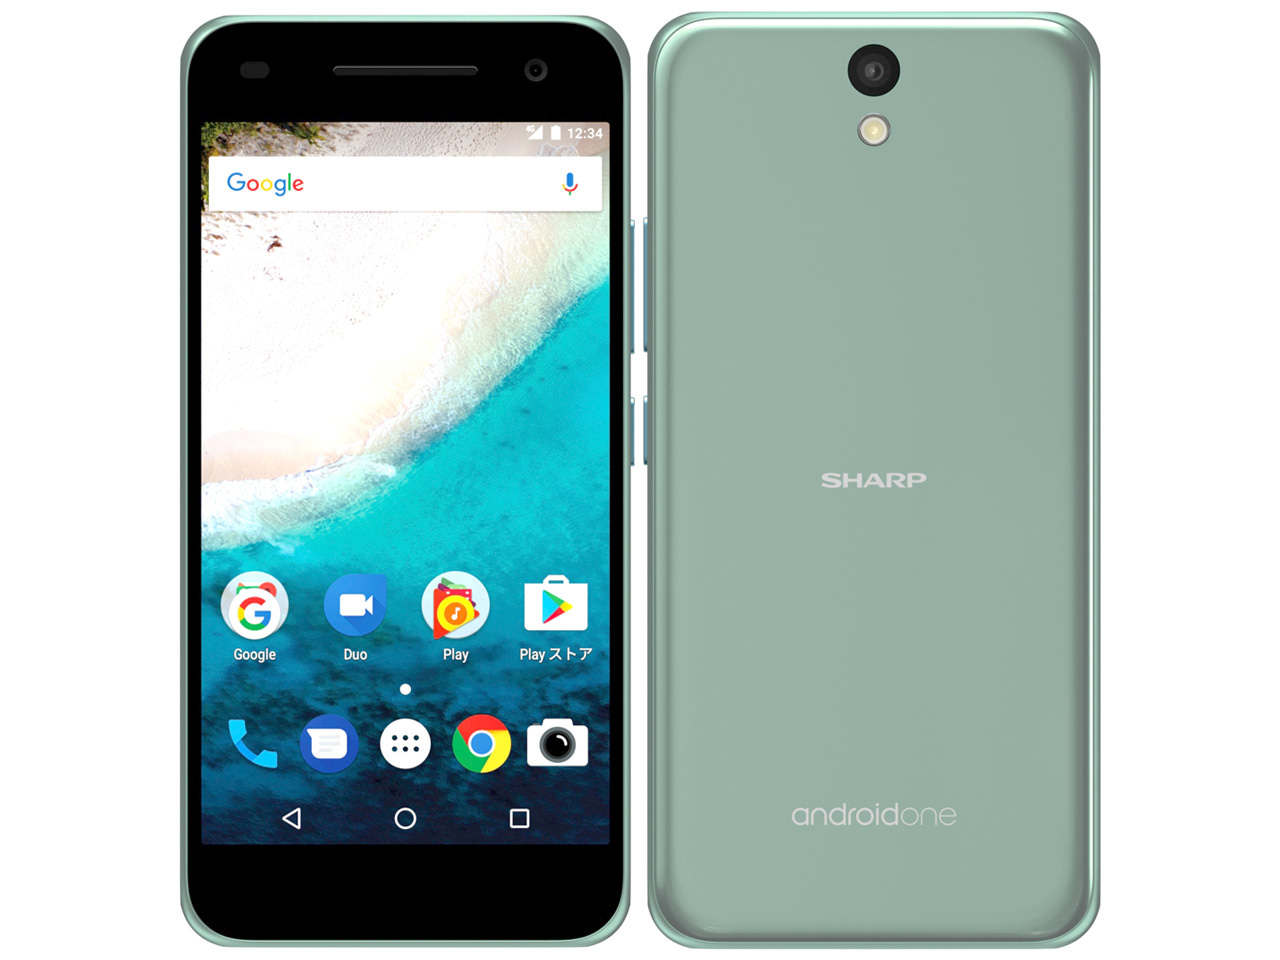 Android One S1 ワイモバイル [ターコイズ]